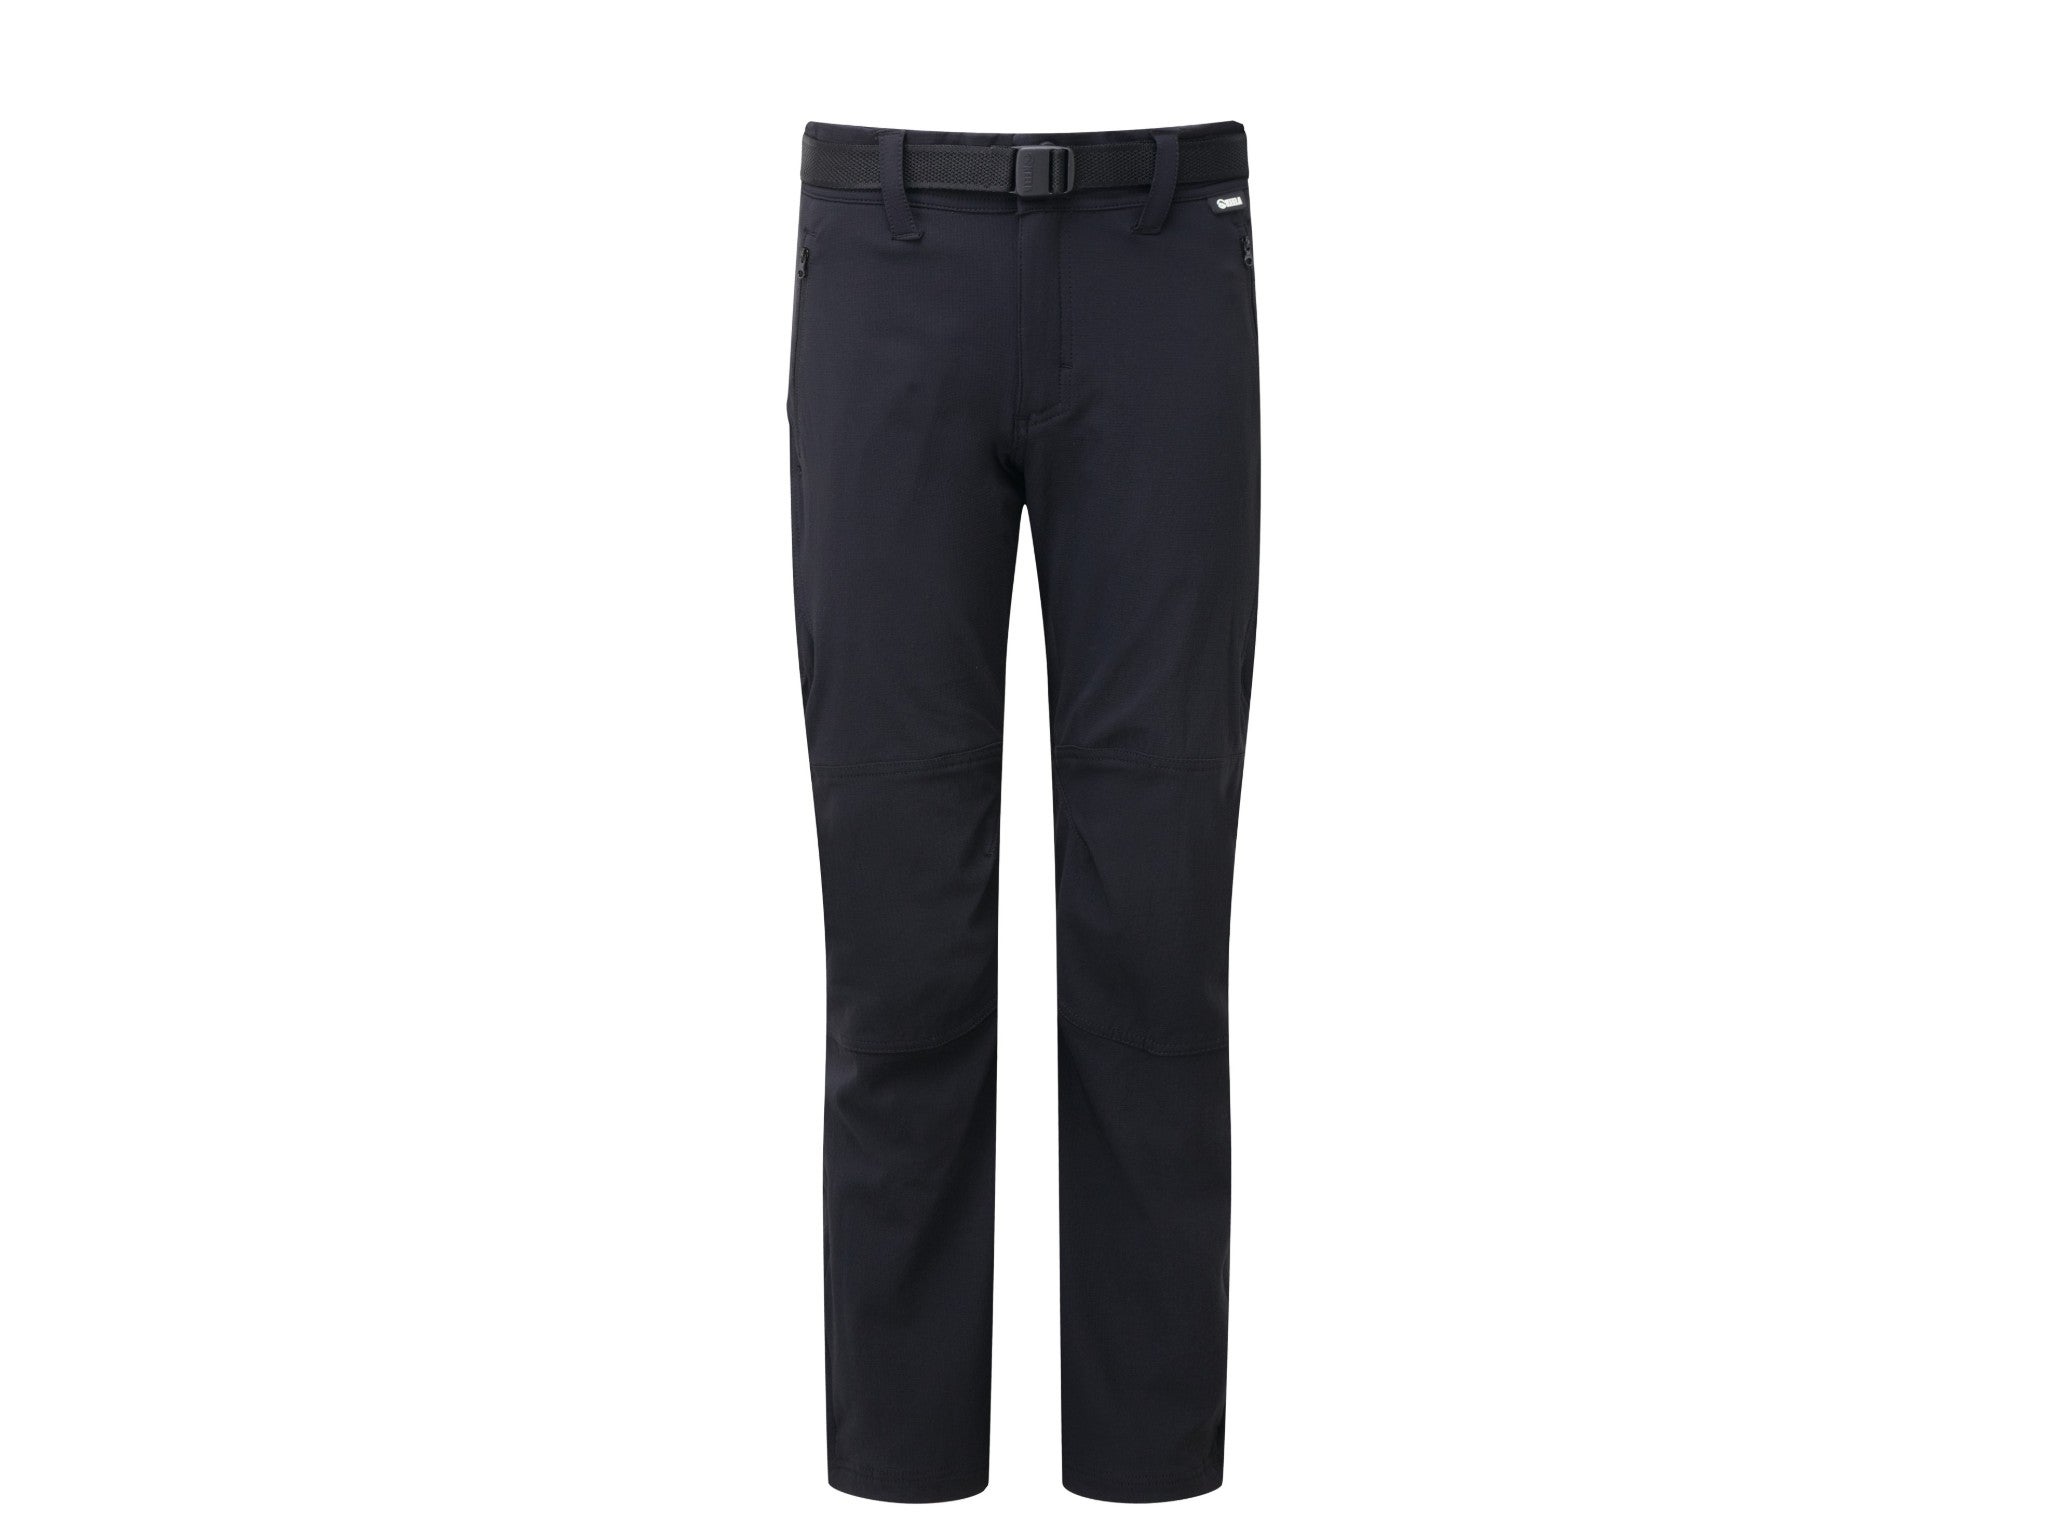 Keela Outdoors scuffer trousers indybest.jpg